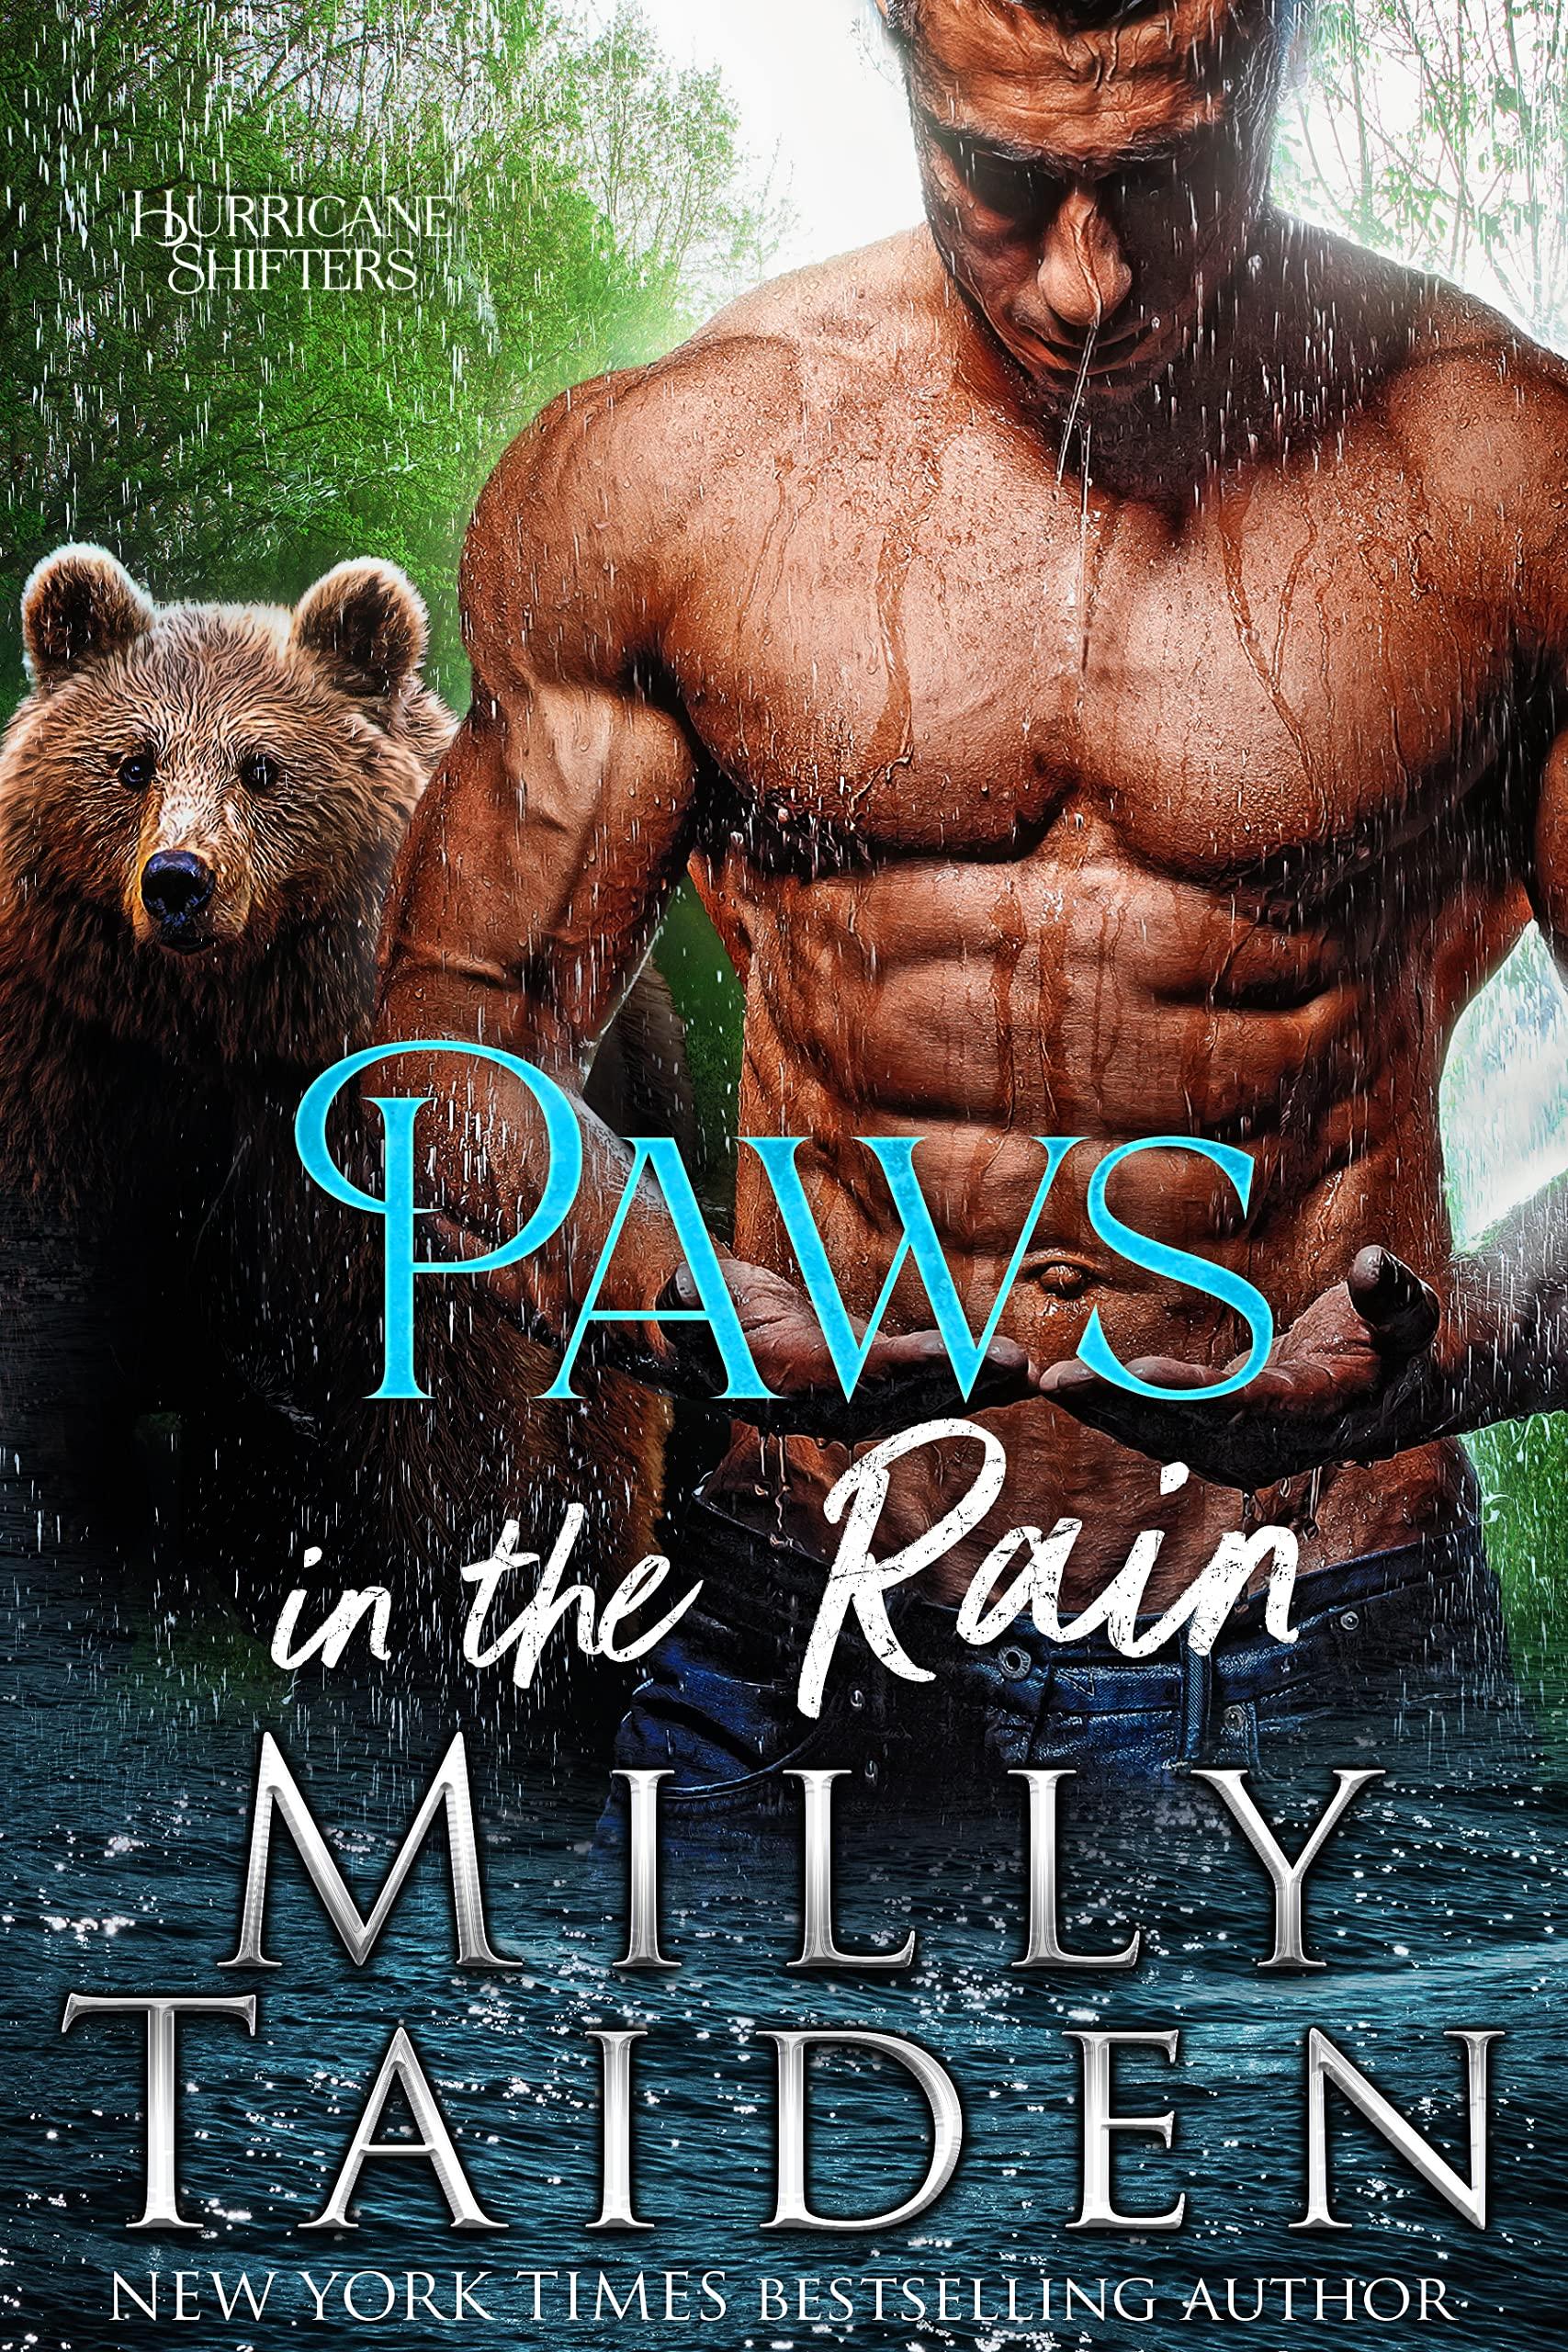 Paws in the Rain